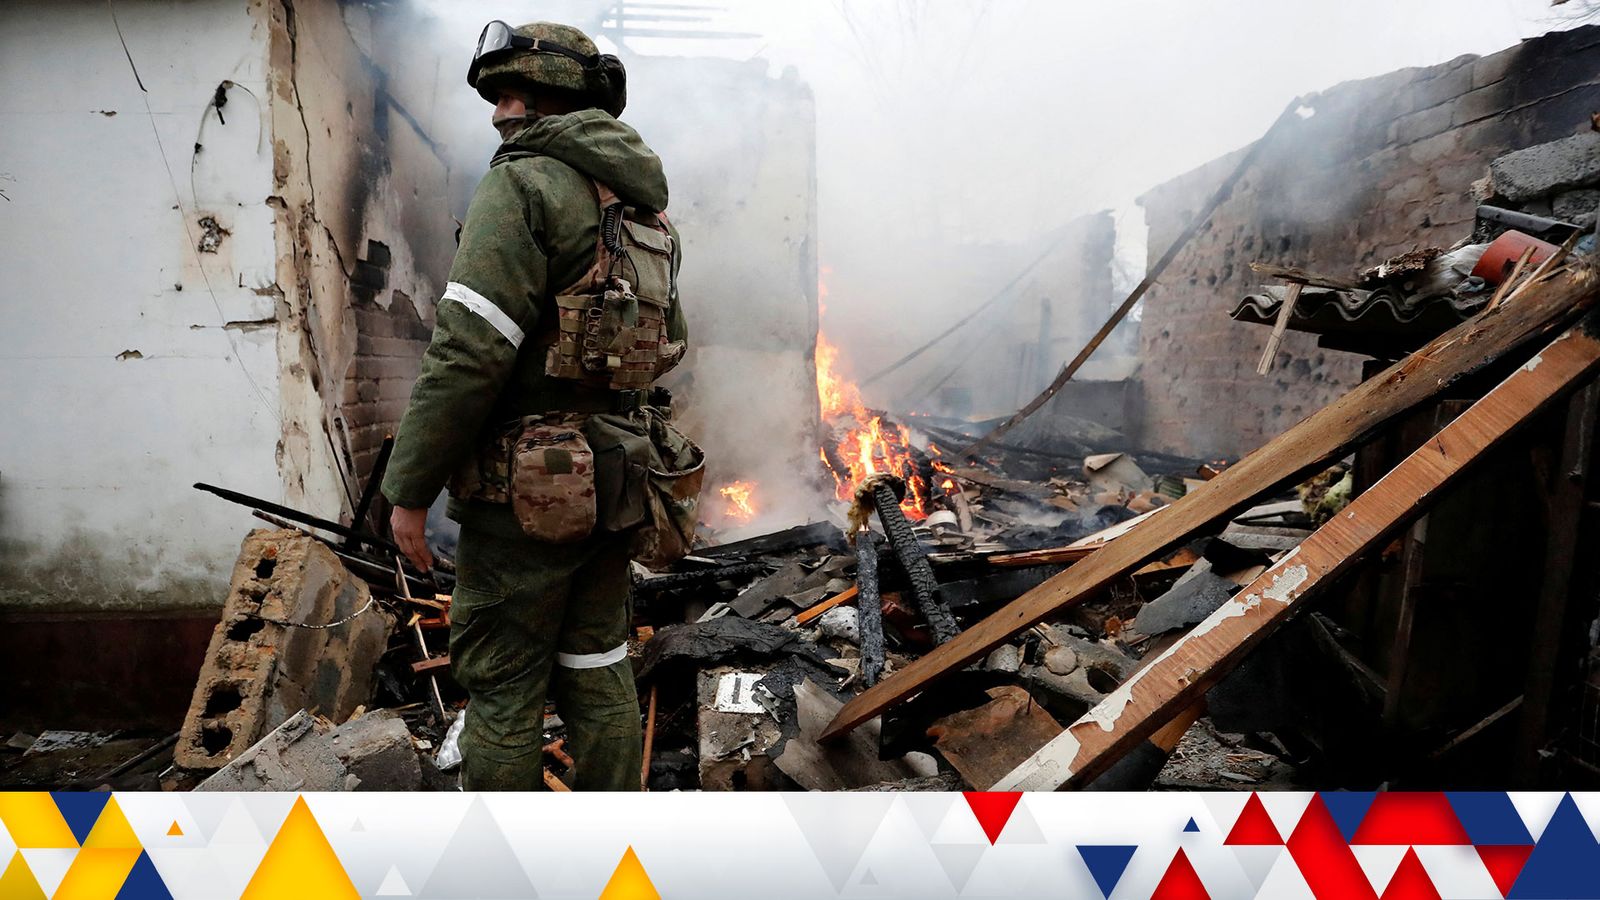 Ukraine invasion: Russia claims 498 of its troops killed and 1,597 wounded  in first admission of casualties, World News